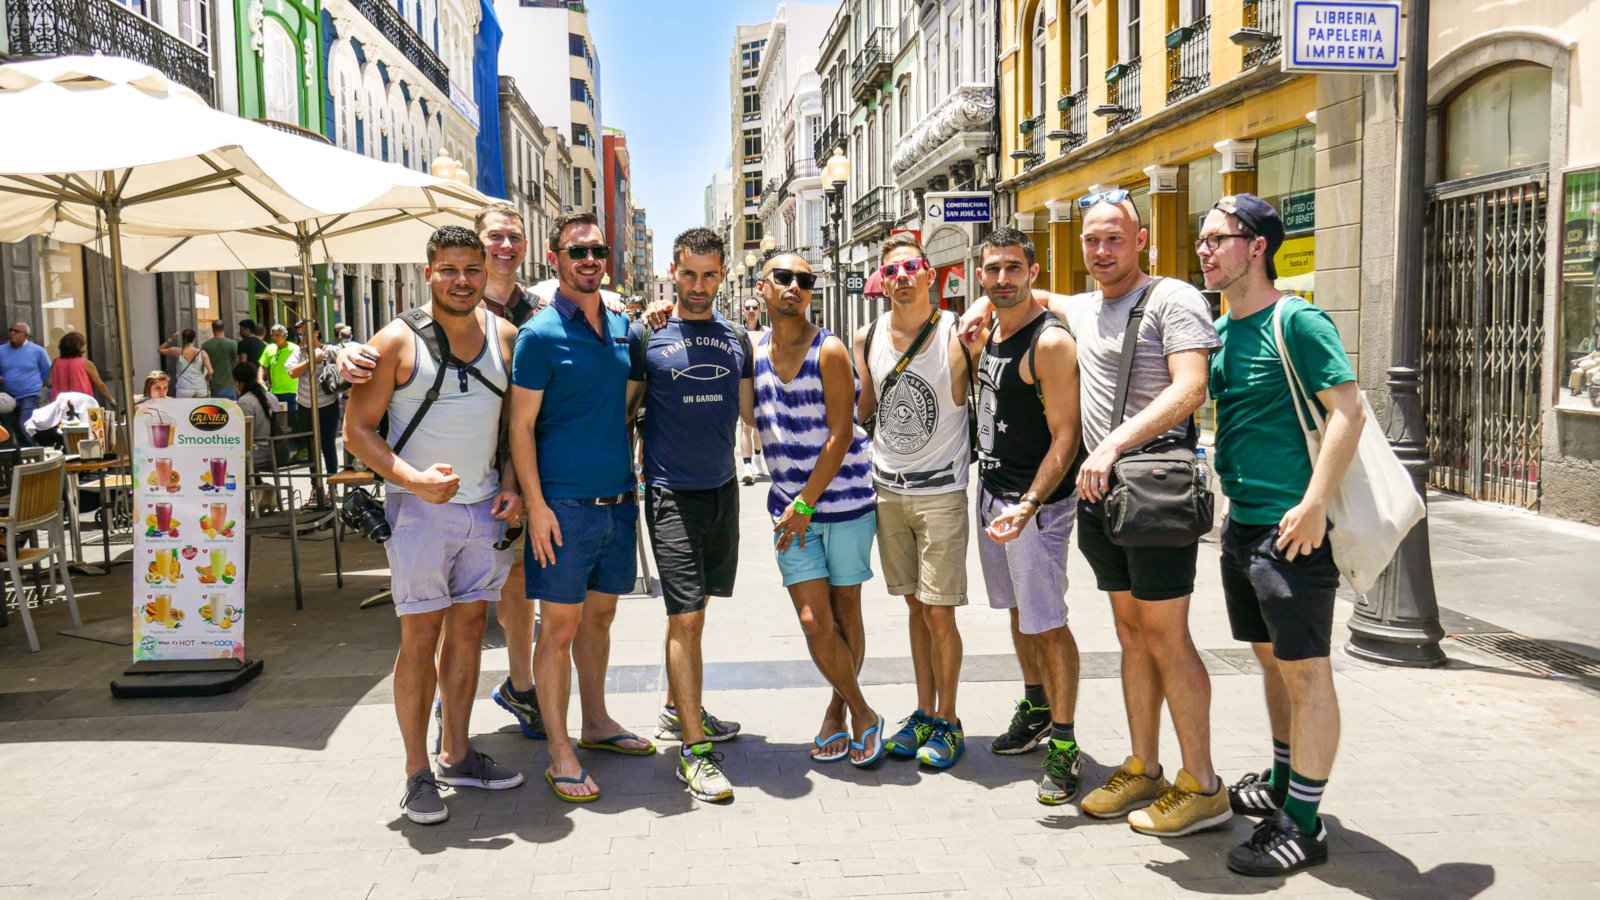 Connecting with LGBTQ locals is an excellent tip for gay couples traveling